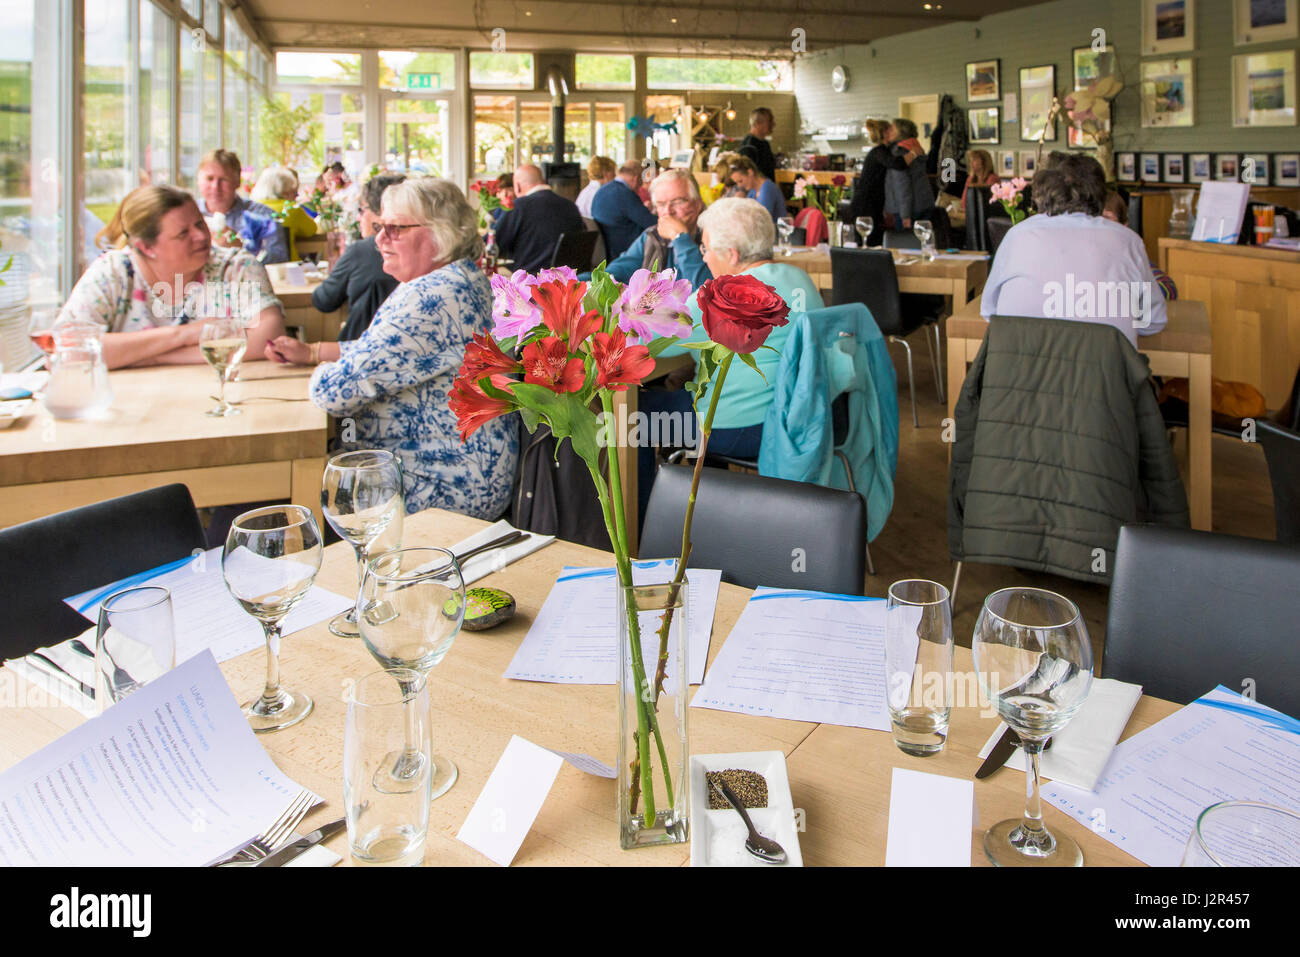 Restaurant Interior Customers Dining Busy Eating out Lunchtime Celebration Celebrating Enjoying Enjoyment Atmosphere Relaxing Stock Photo